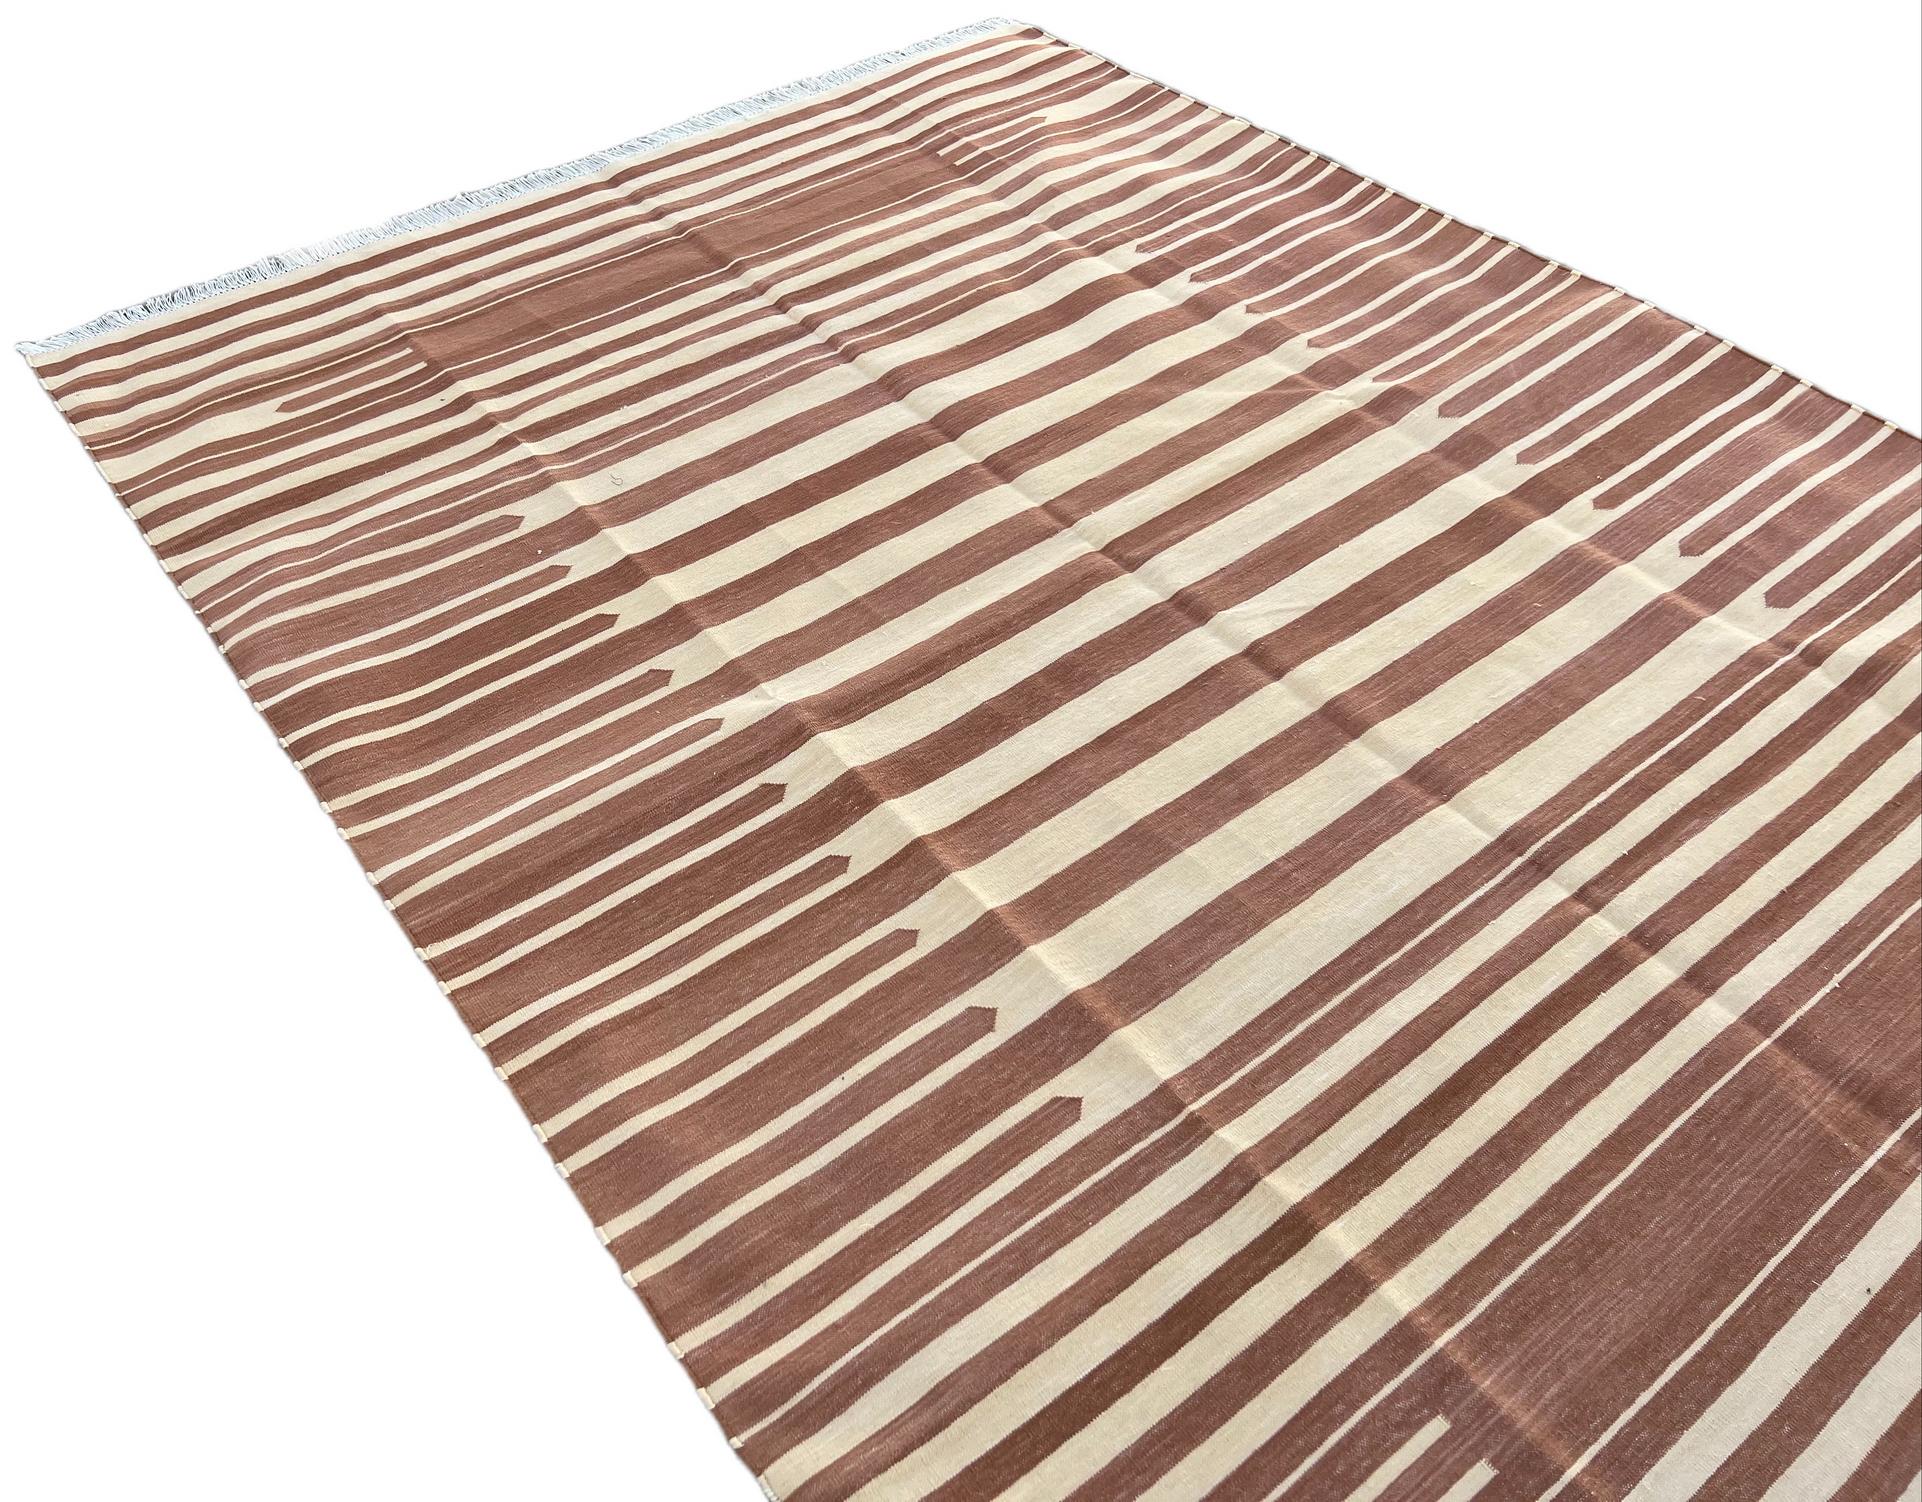 Handmade Cotton Area Flat Weave Rug, 5x7 Tan And Cream Striped Indian Dhurrie In New Condition For Sale In Jaipur, IN